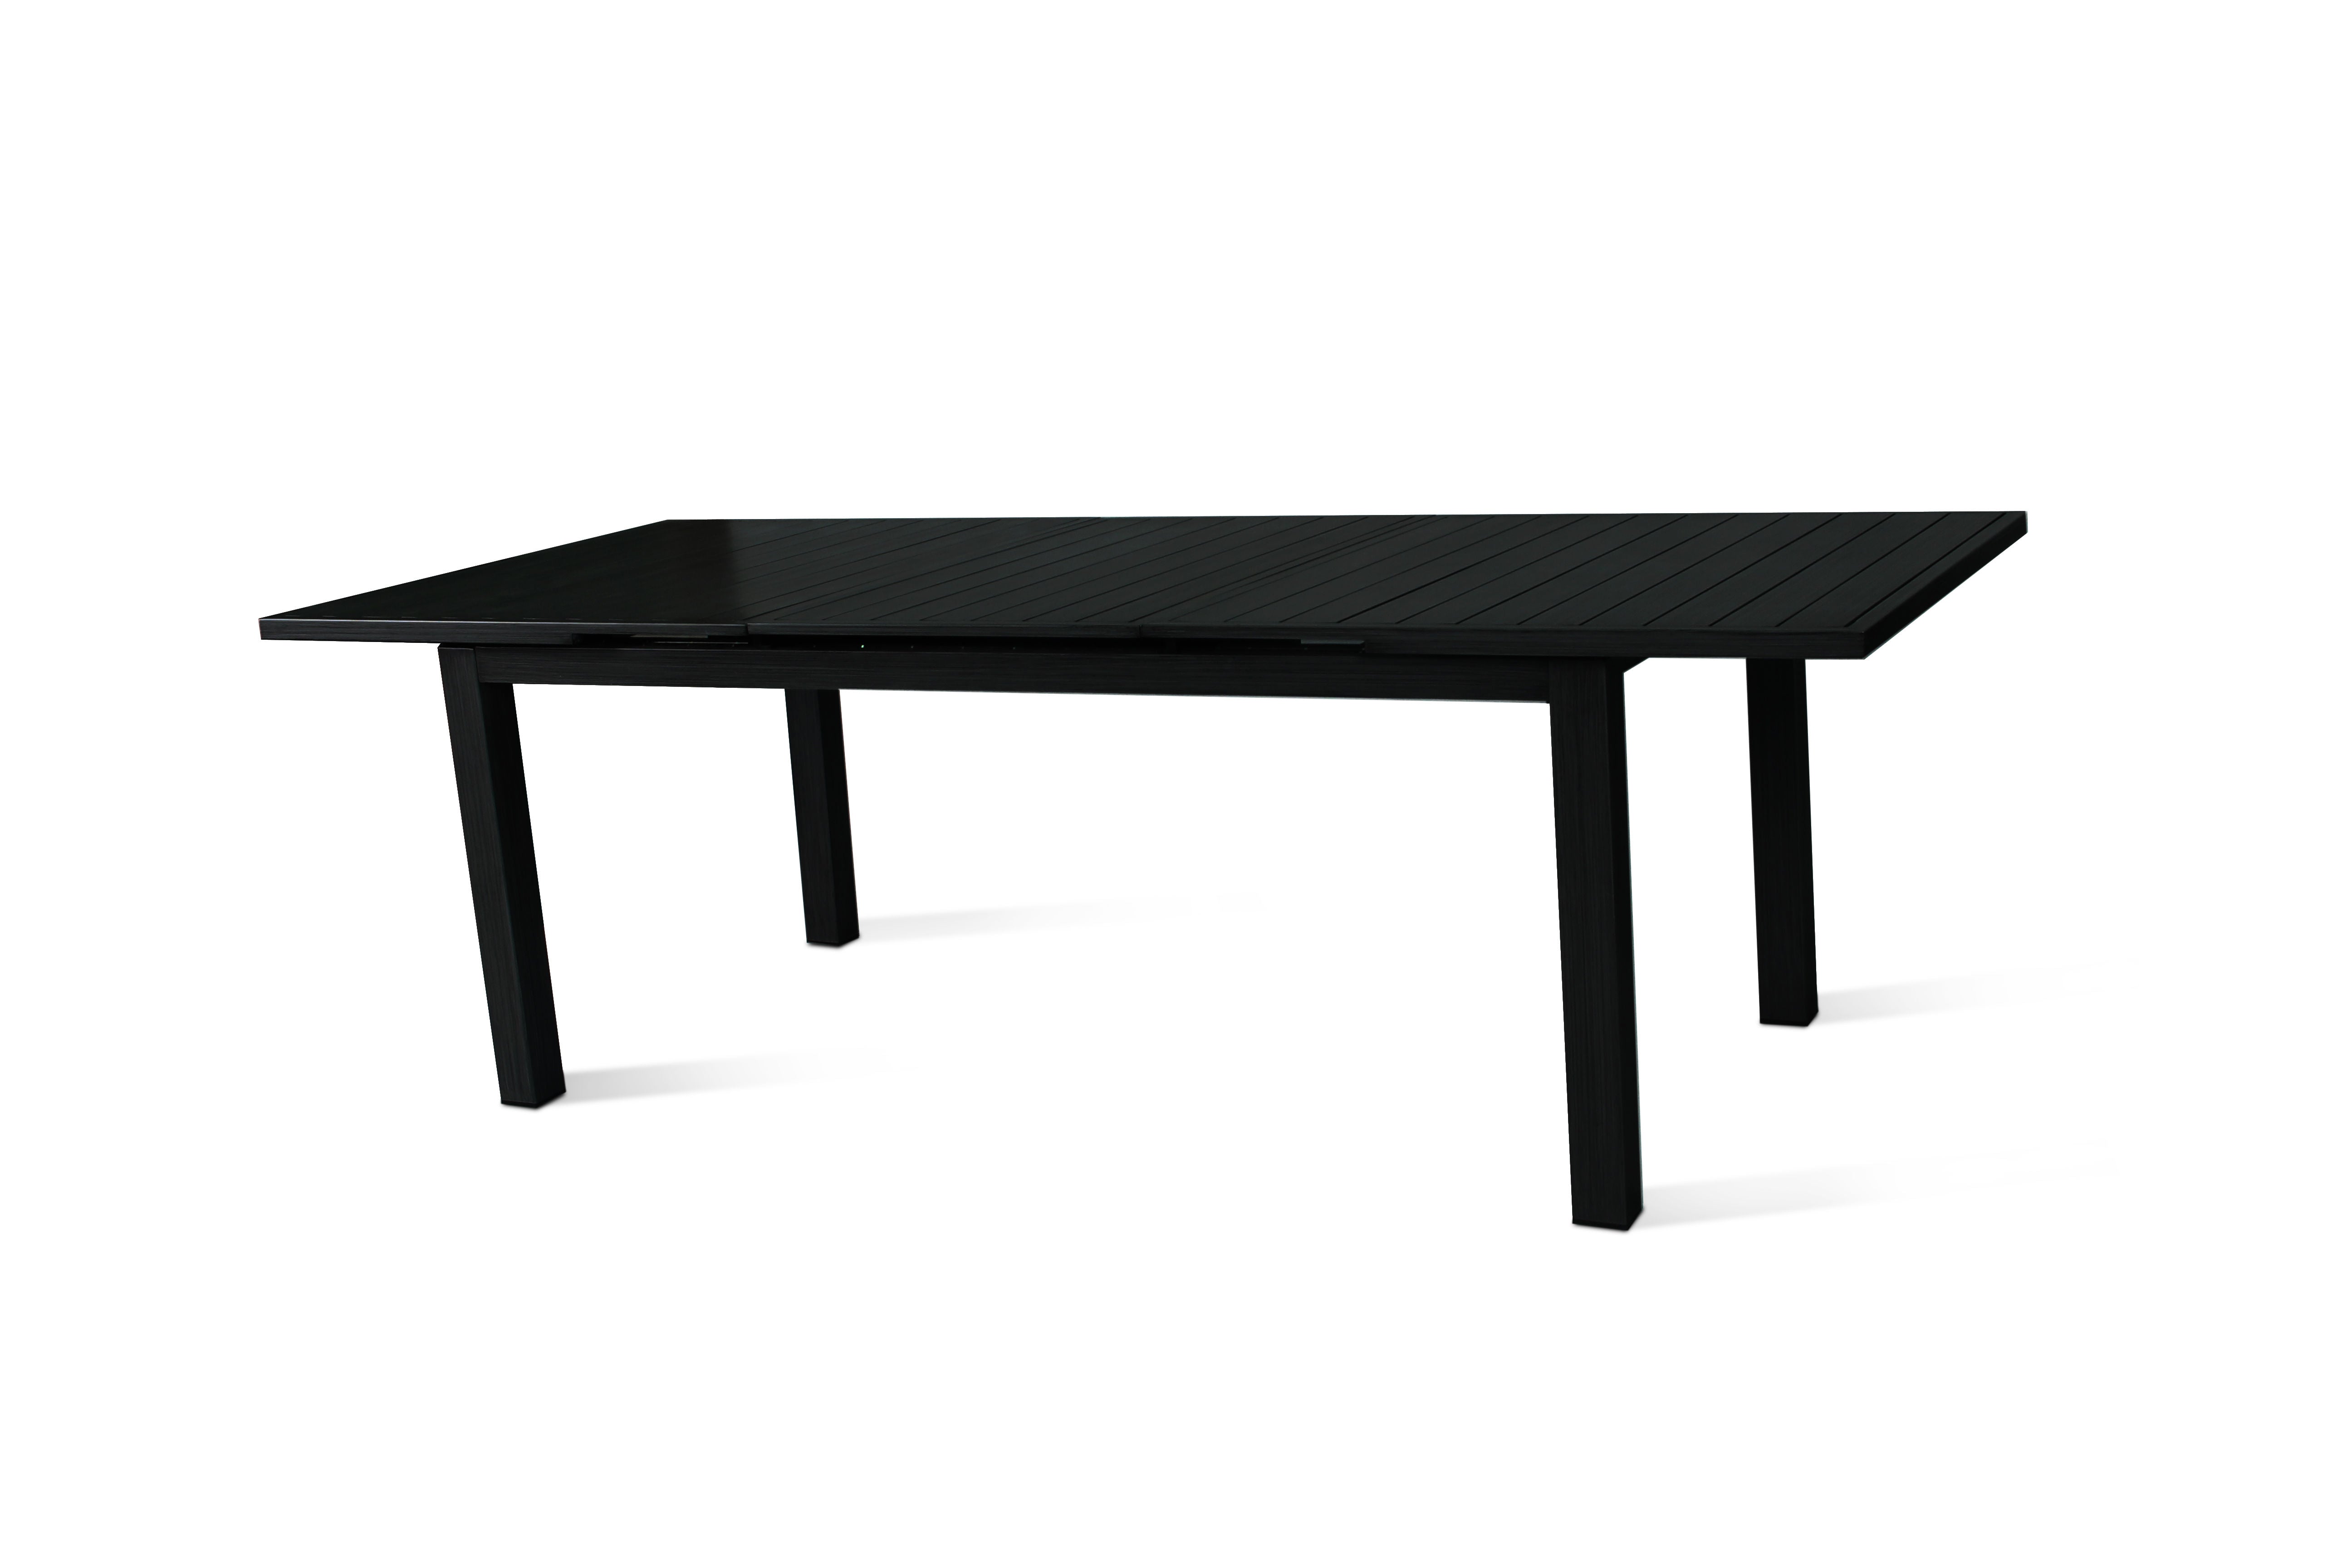 PatioZone Extendable Dining Table with Slated Tabletop (Sliding Mechanism) Aluminum Frame (MOSS-T306N) - Matte Black